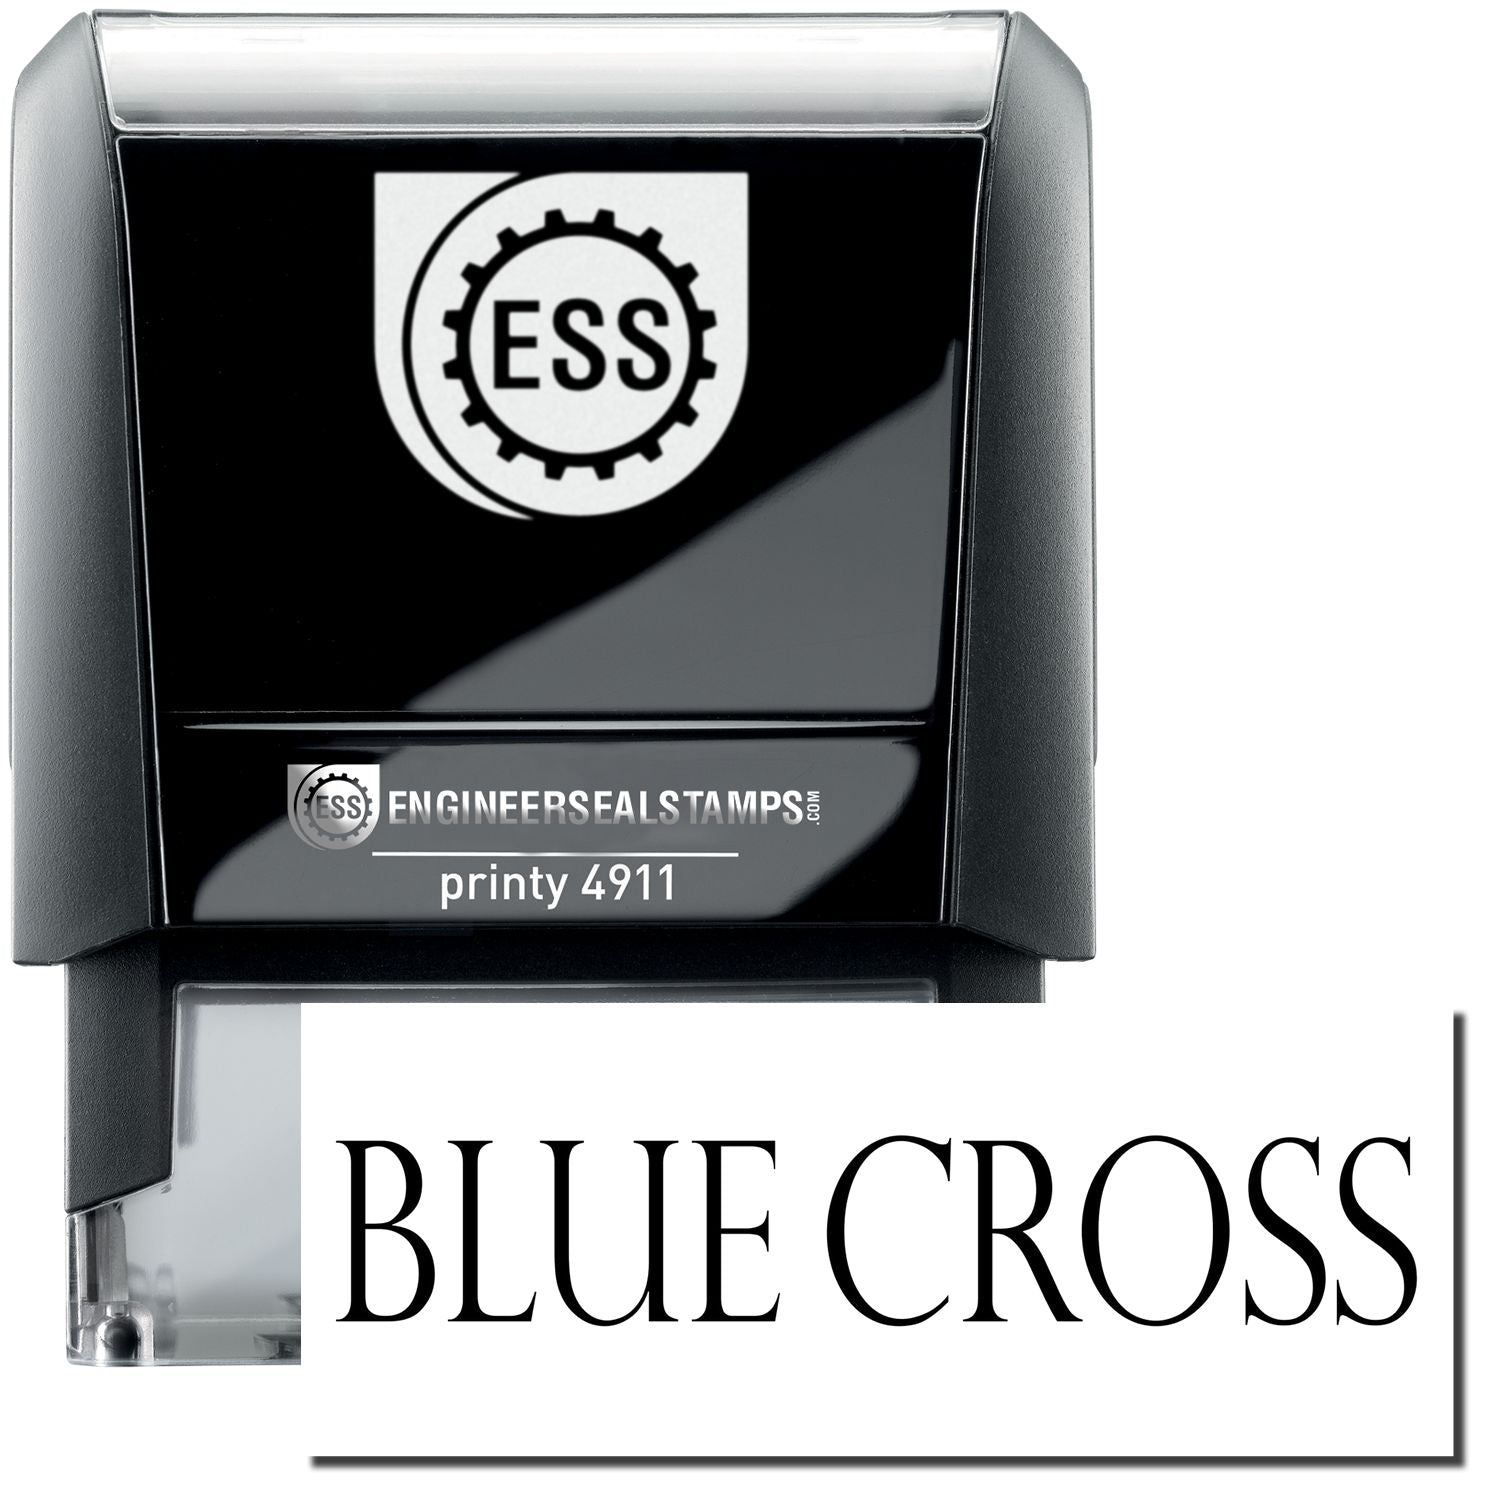 A self-inking stamp with a stamped image showing how the text "BLUE CROSS" is displayed after stamping.